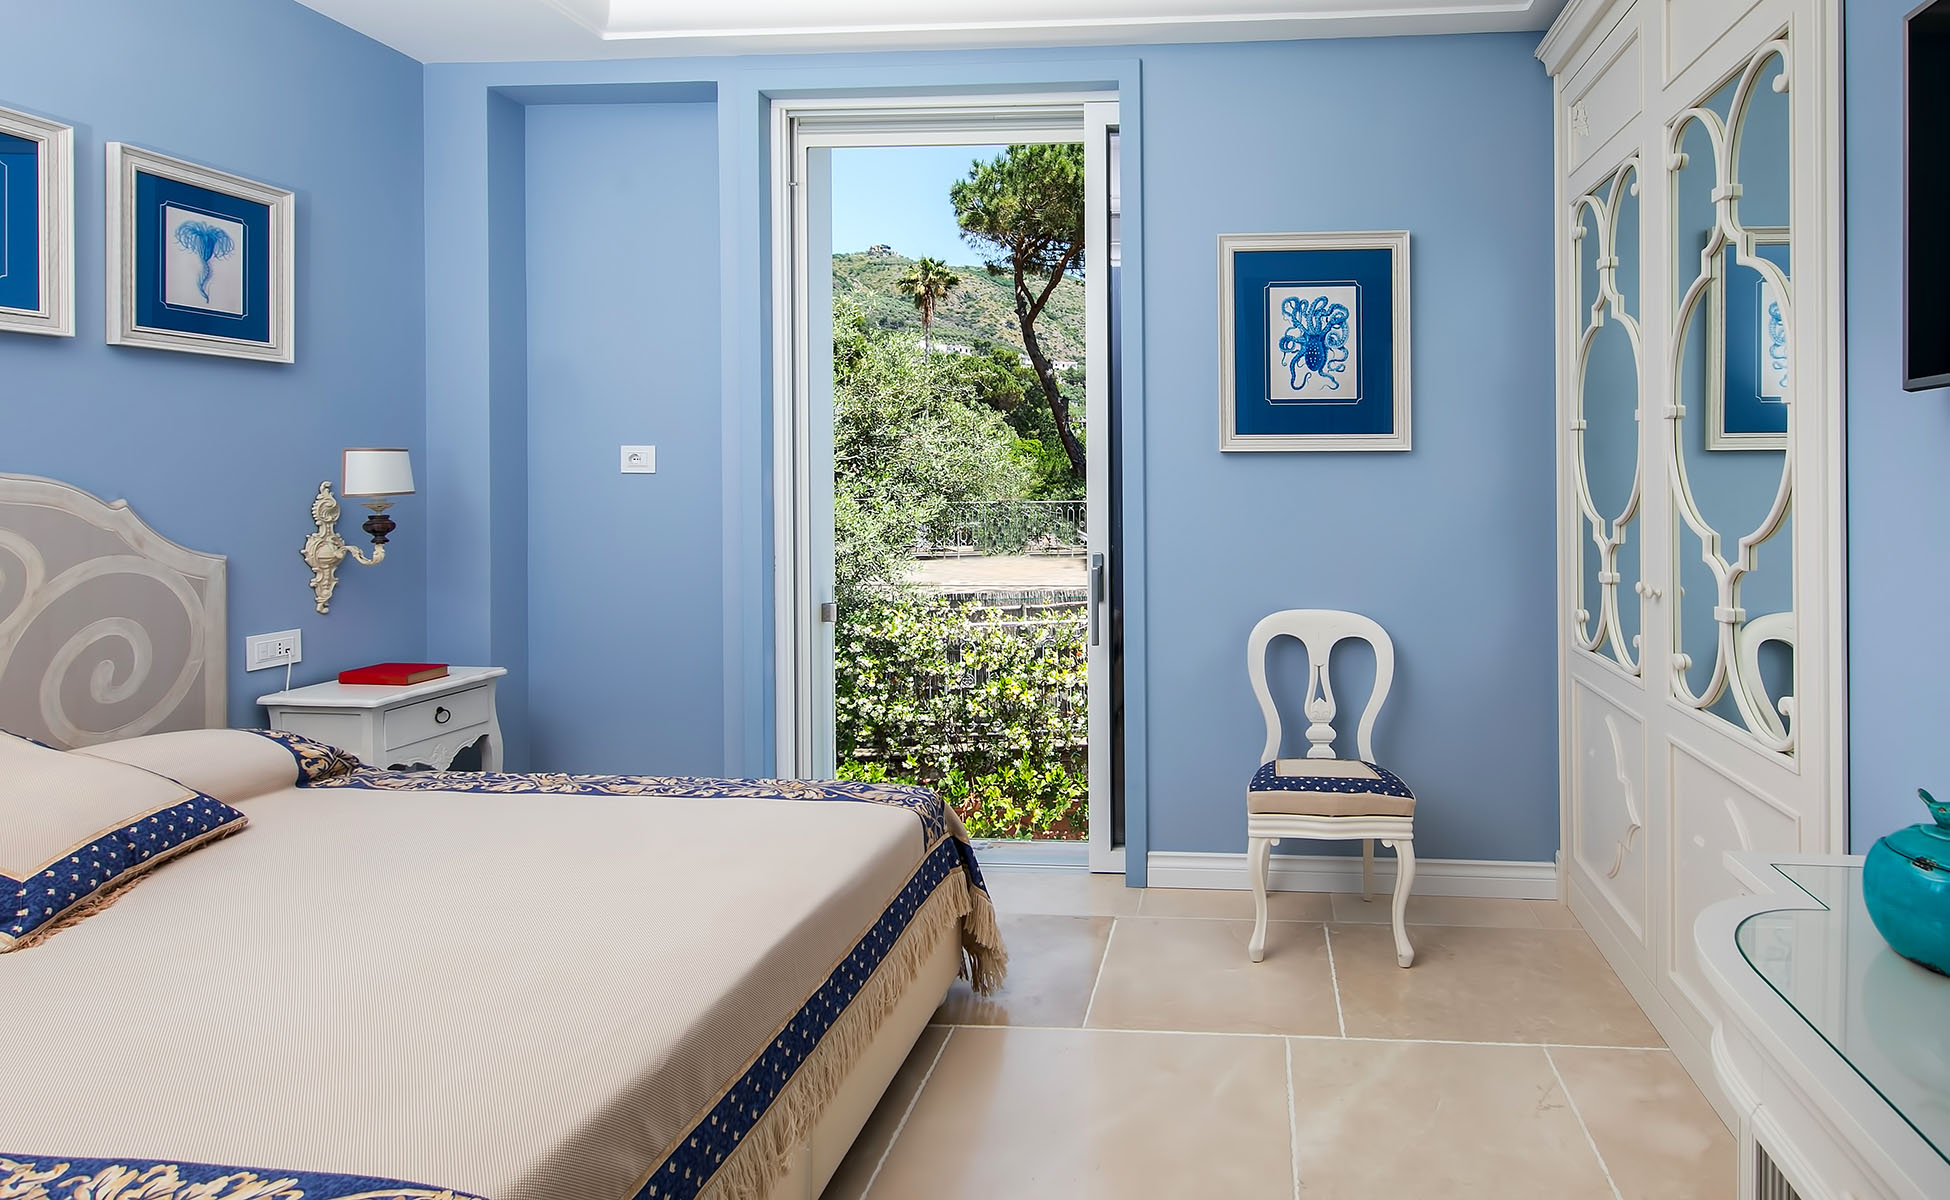 <p>Lovelydays Luxury Rentals introduce you pictures of a charming house in the heart of Amalfi Coast</p>